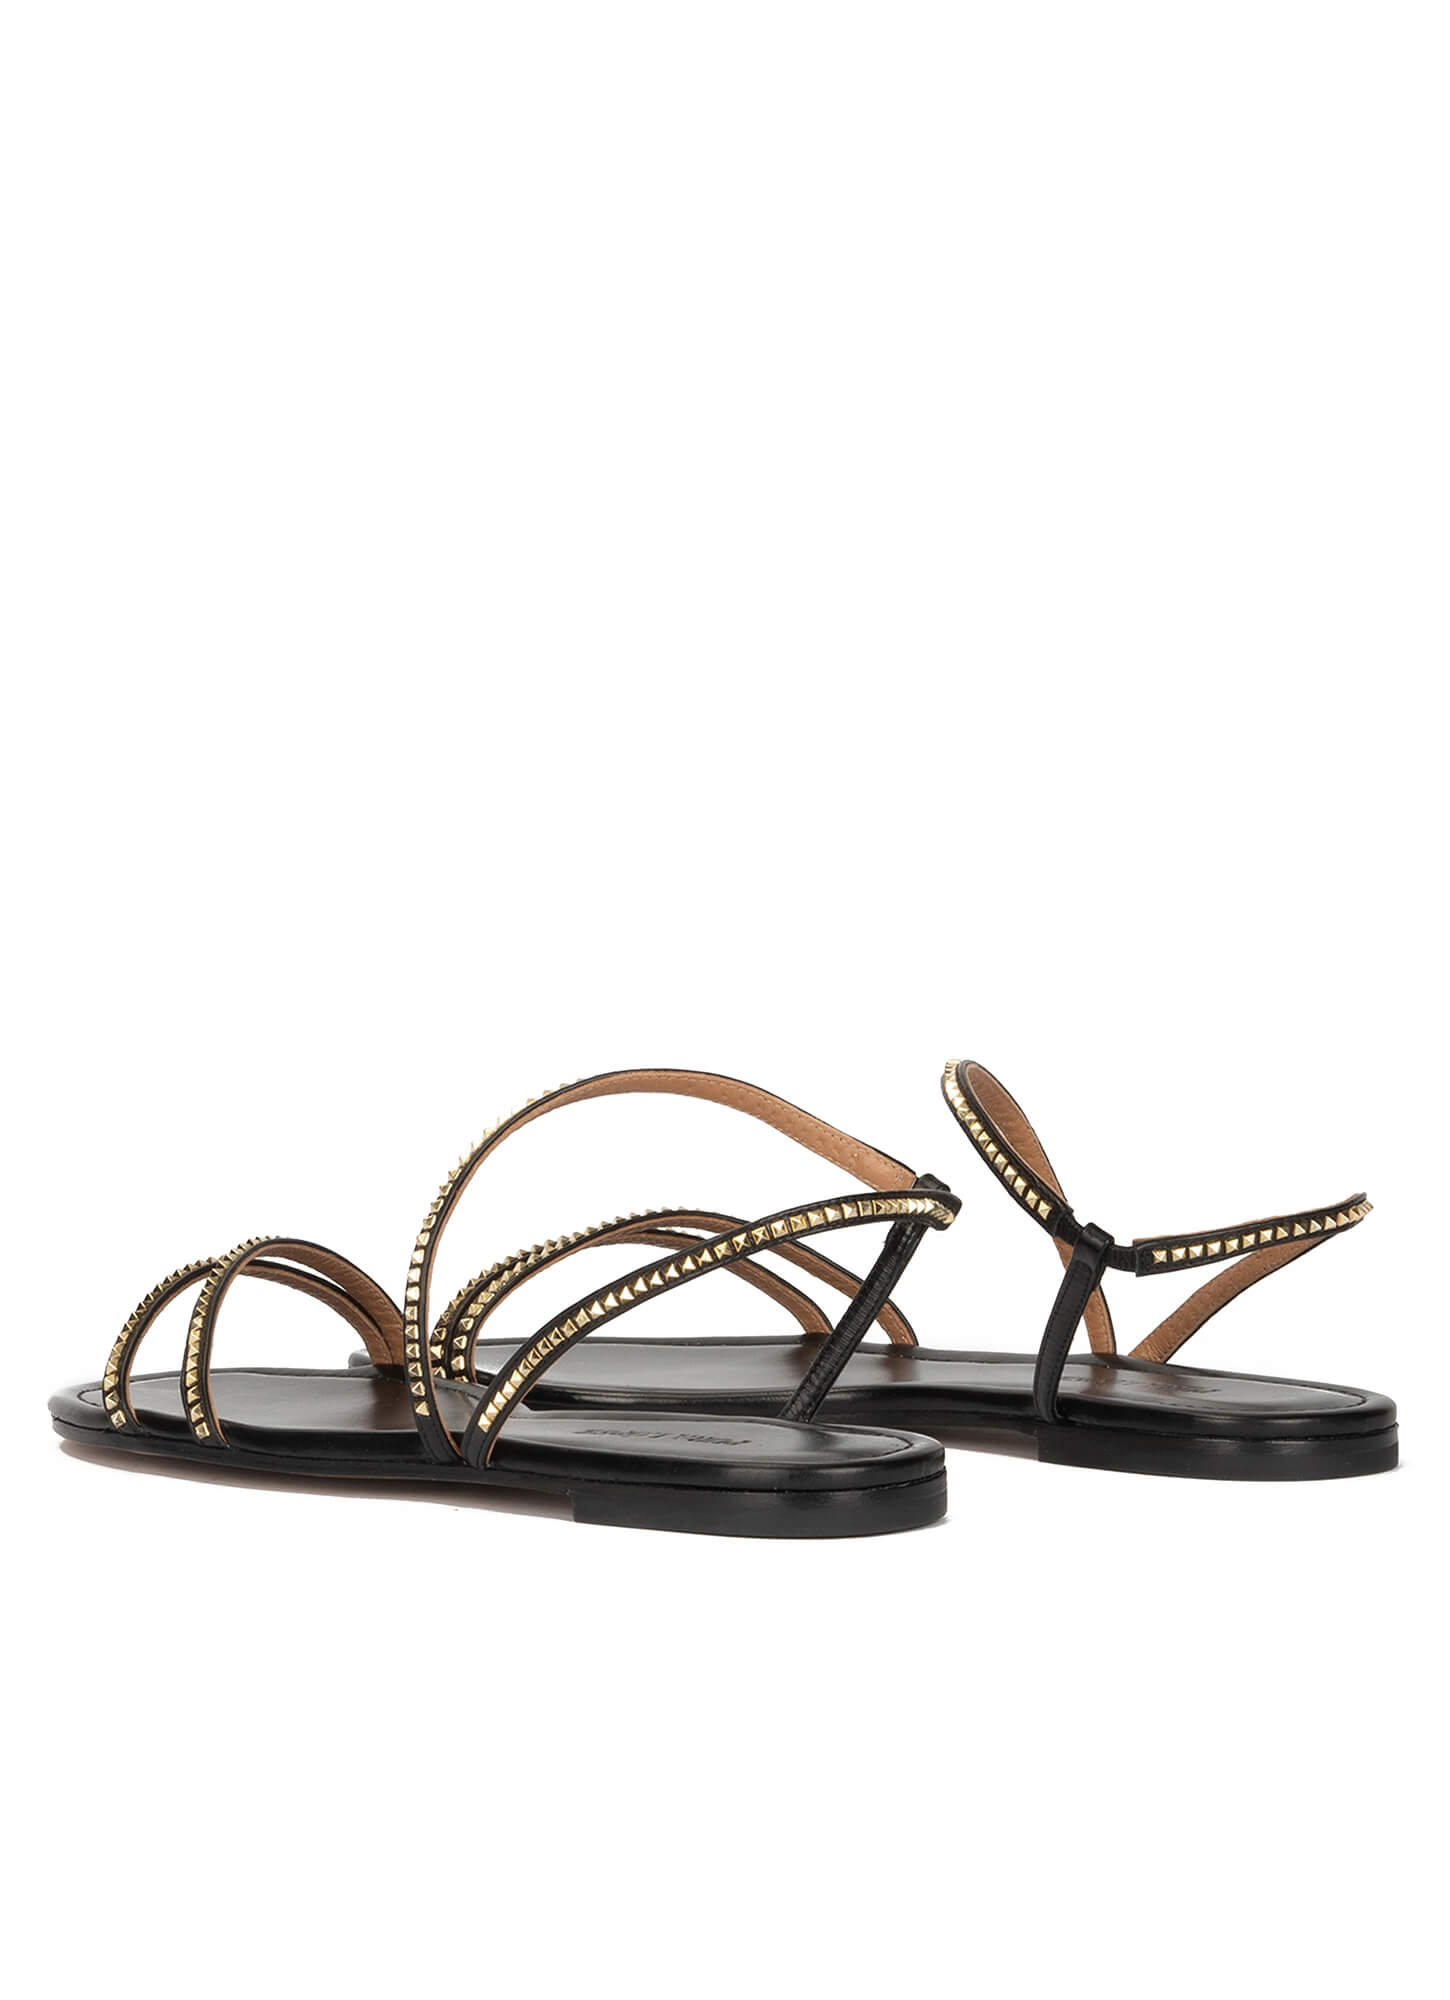 Strappy flat sandals in black leather . PURA LOPEZ